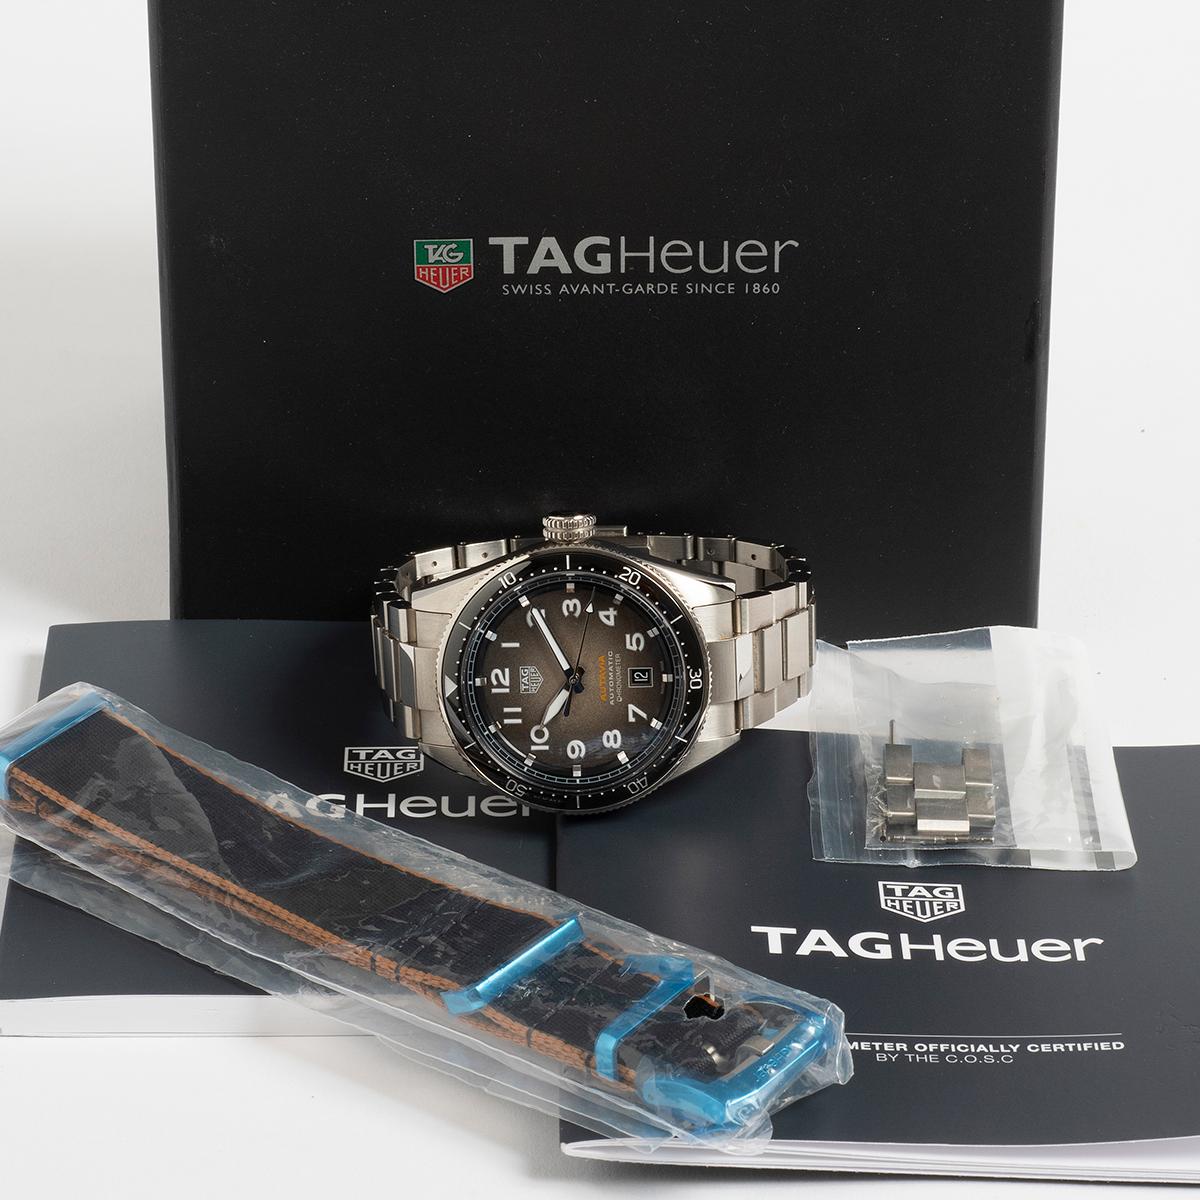 Our Tag Heuer Autavia reference WBE5114 features a 42mm stainless steel case with stainless steel bracelet as well as unused / factory sealed nato strap. Presented in outstanding condition with only light signs of use from new, to be expected given